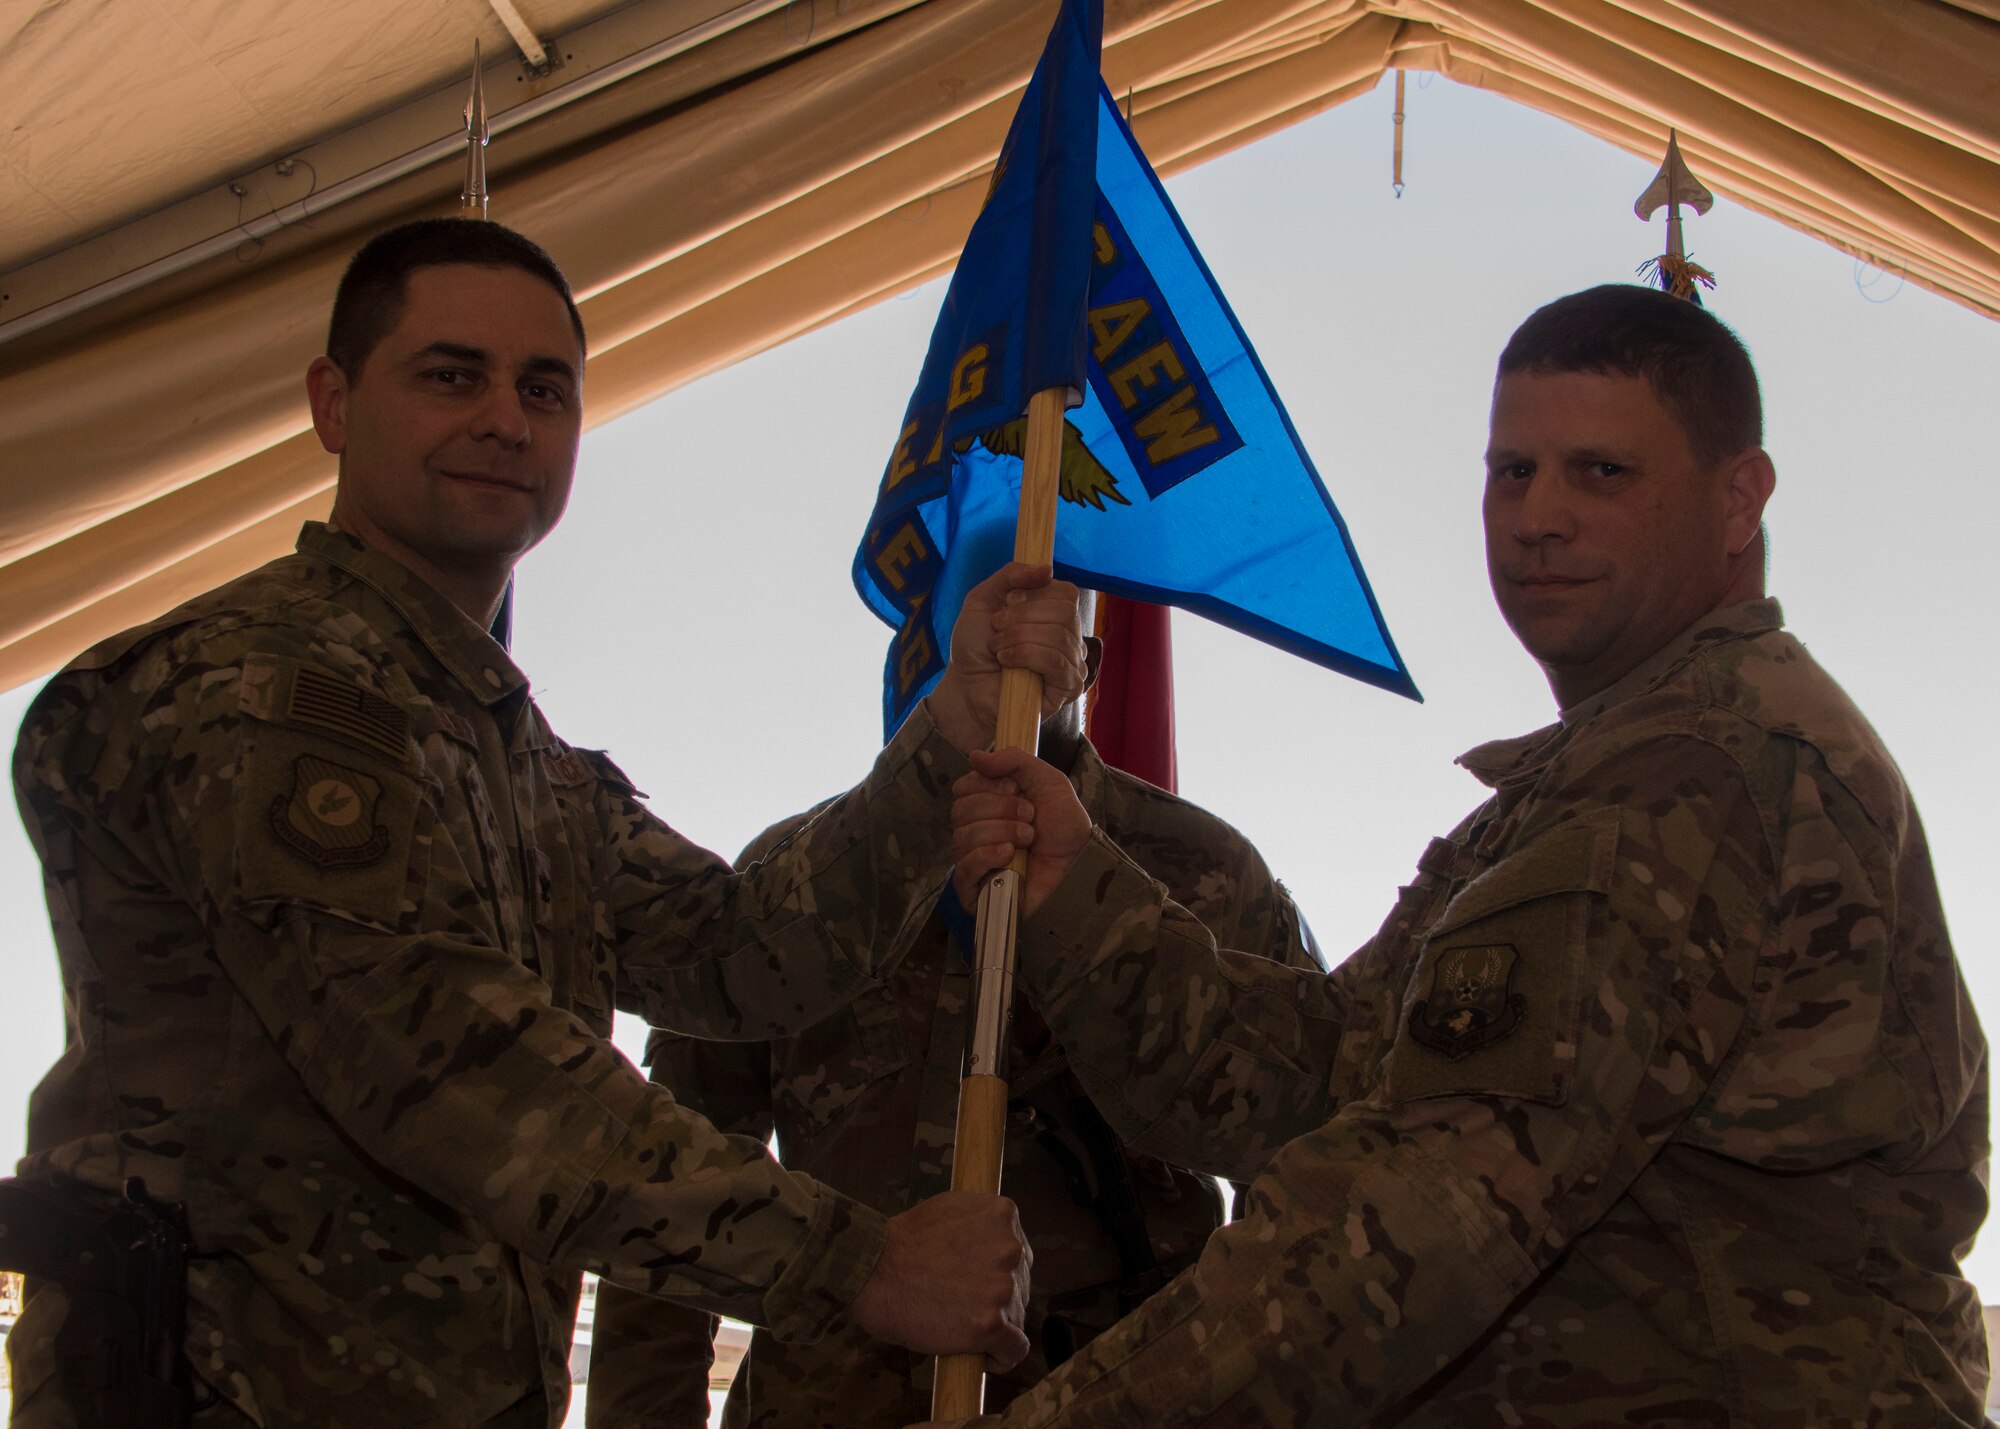 U.S. Air Force Col. Jay Sabia, 370th Air Expeditionary Advisory Group commander, left, gives the group flag to U.S. Air Force Lt. Col. Jim Eddleman, the incoming 370th AEAG Detachment 1 commander, right, at a change of command ceremony, Jan. 8, 2017 at Al Asad Air Base, Iraq. Possession of the flag symbolizes command over the unit. (U.S. Air Force photo/Senior Airman Andrew Park)